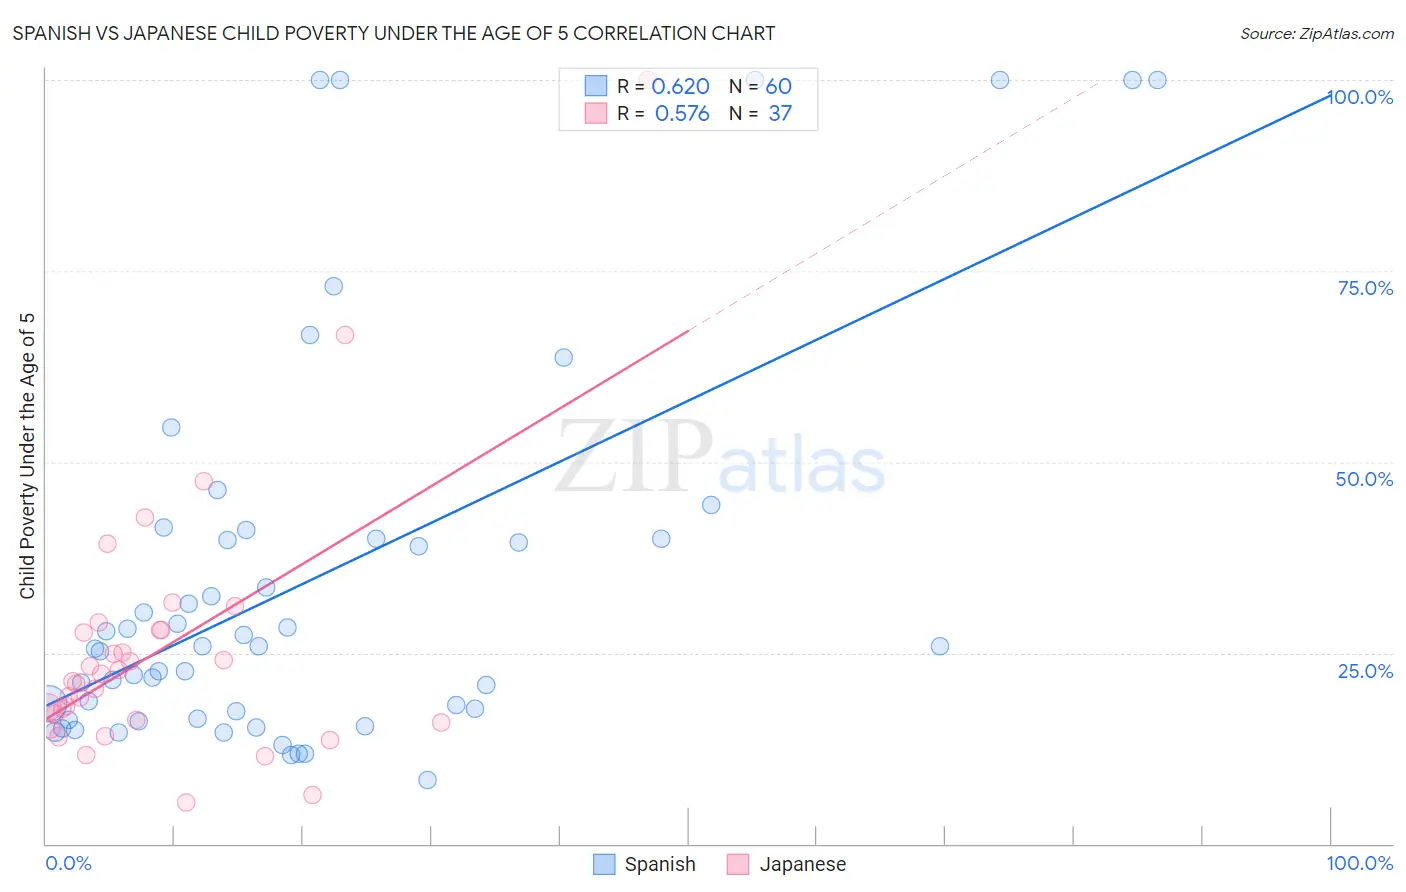 Spanish vs Japanese Child Poverty Under the Age of 5